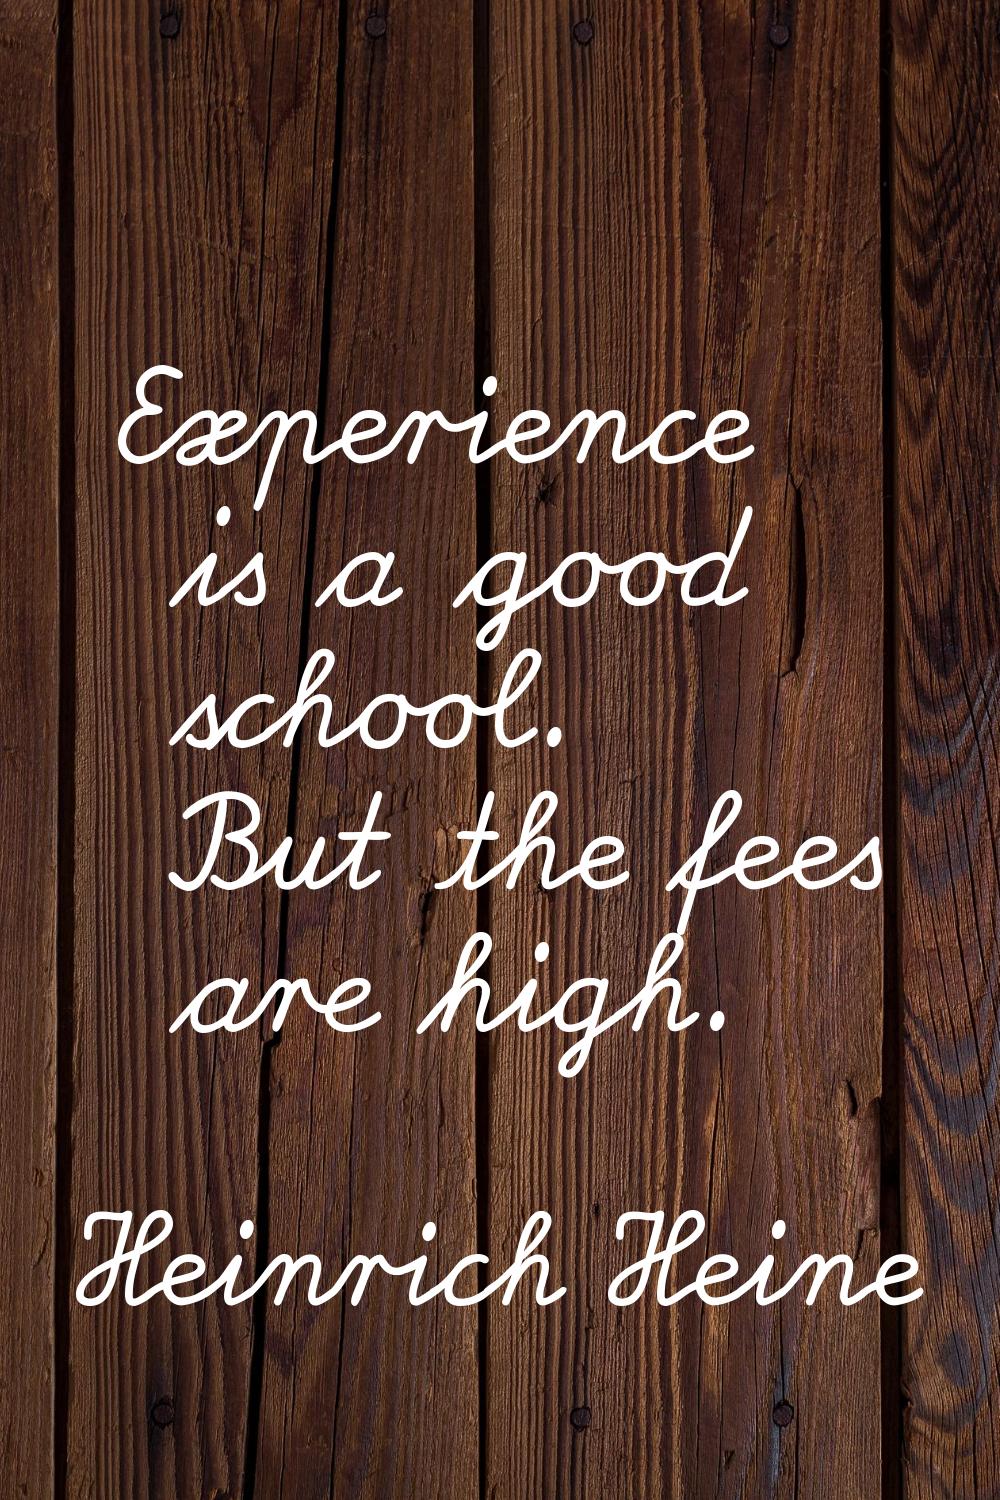 Experience is a good school. But the fees are high.